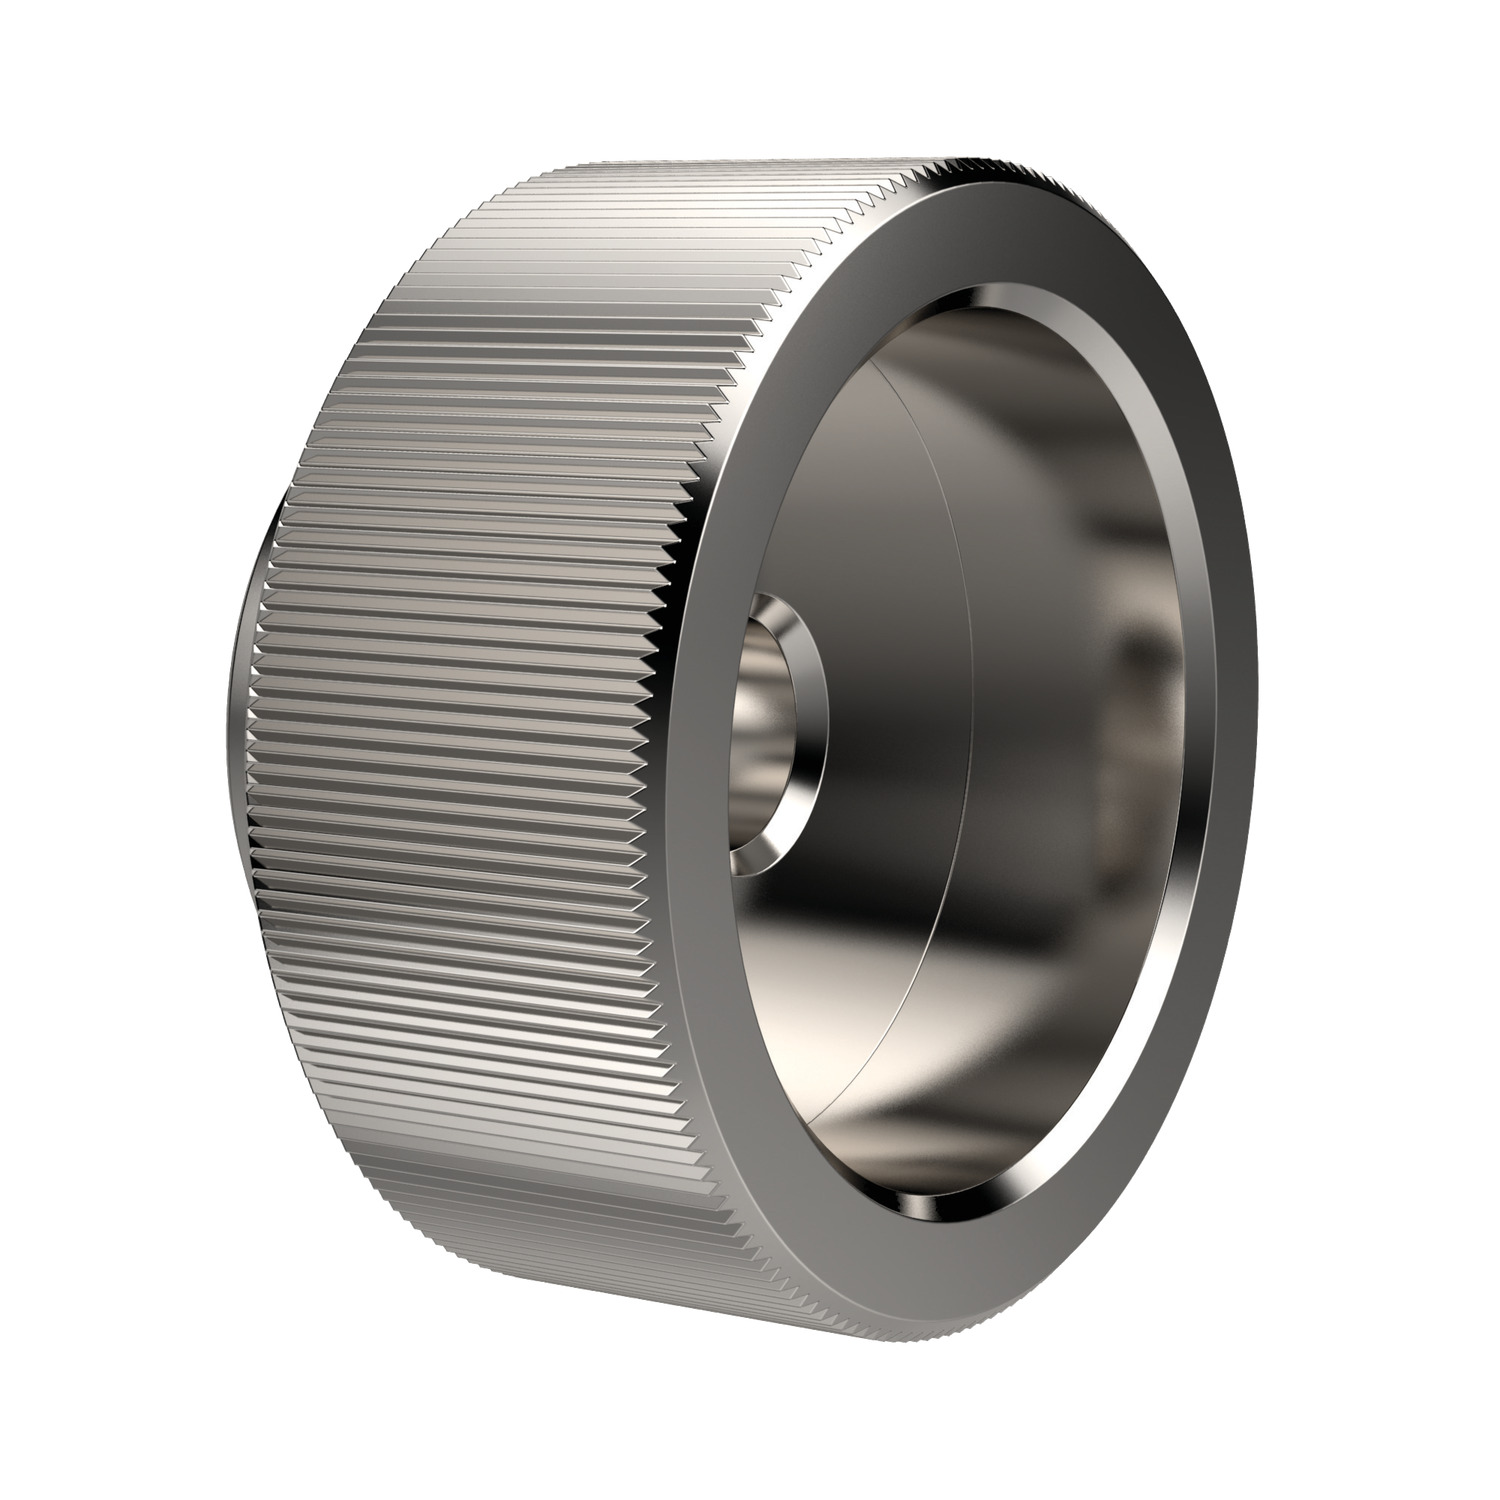 P0409.A2 Knurled Nuts